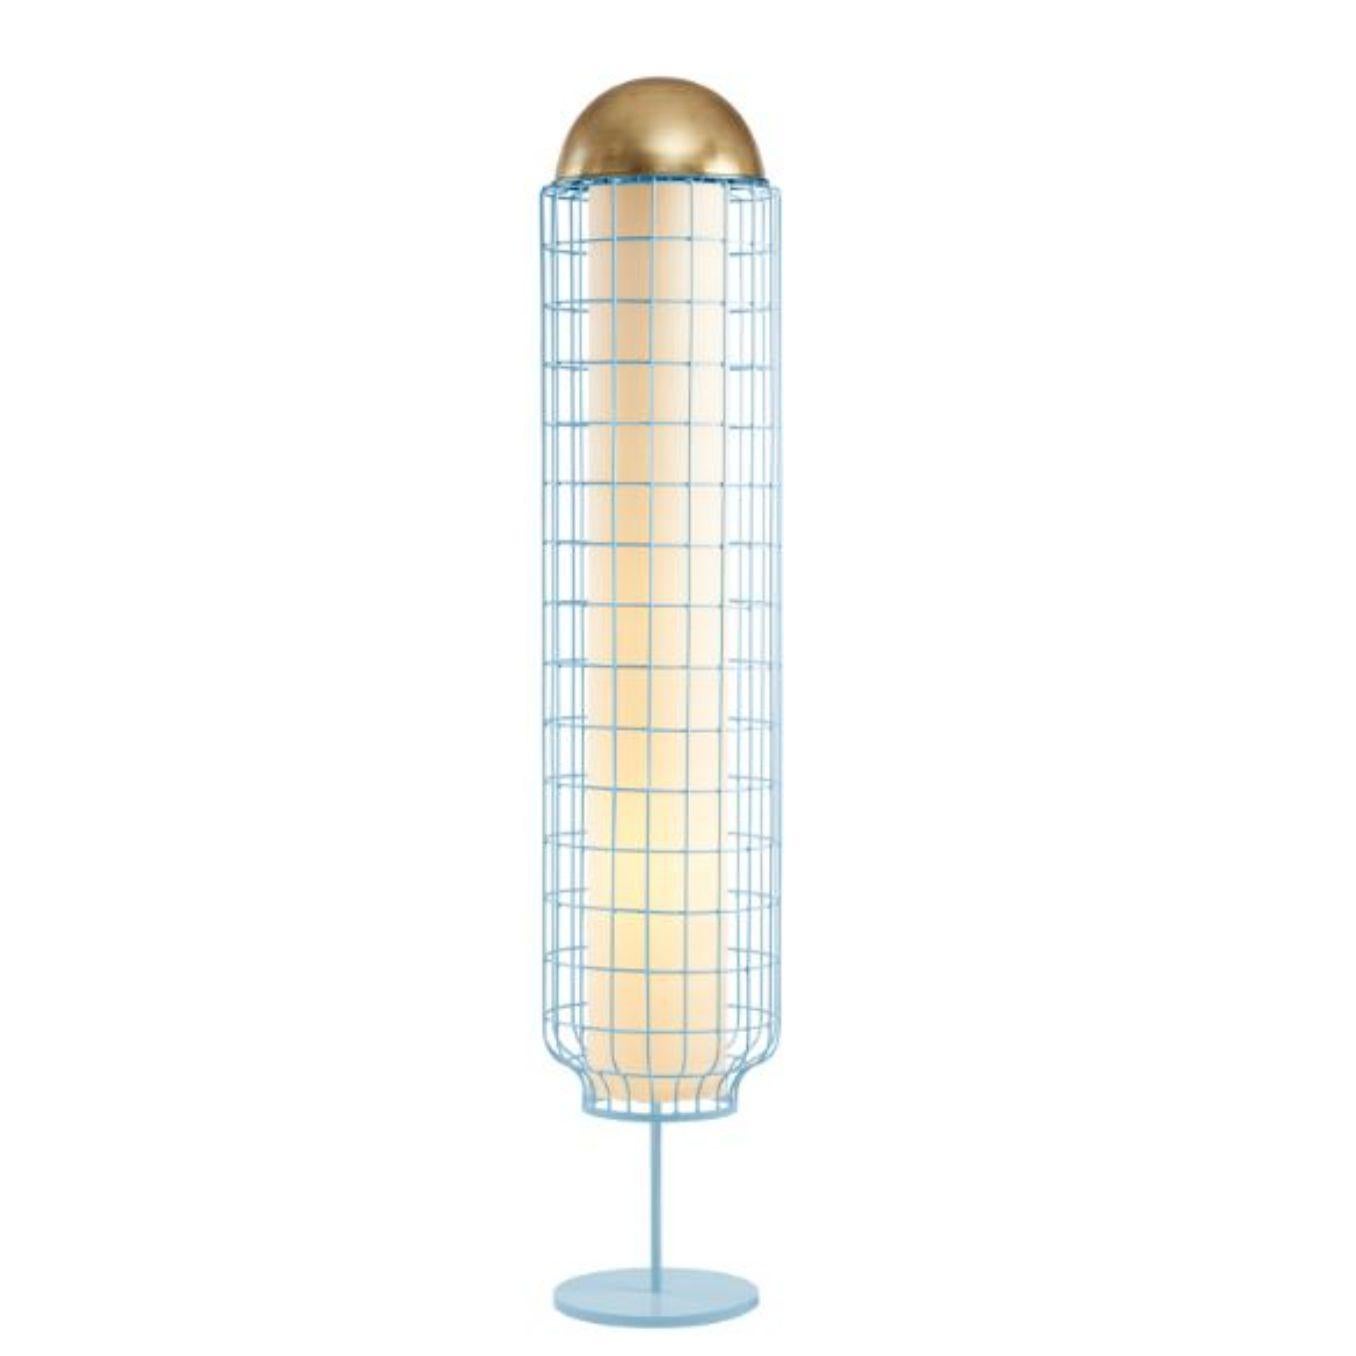 Portuguese Brass Magnolia Floor Lamp by Dooq For Sale